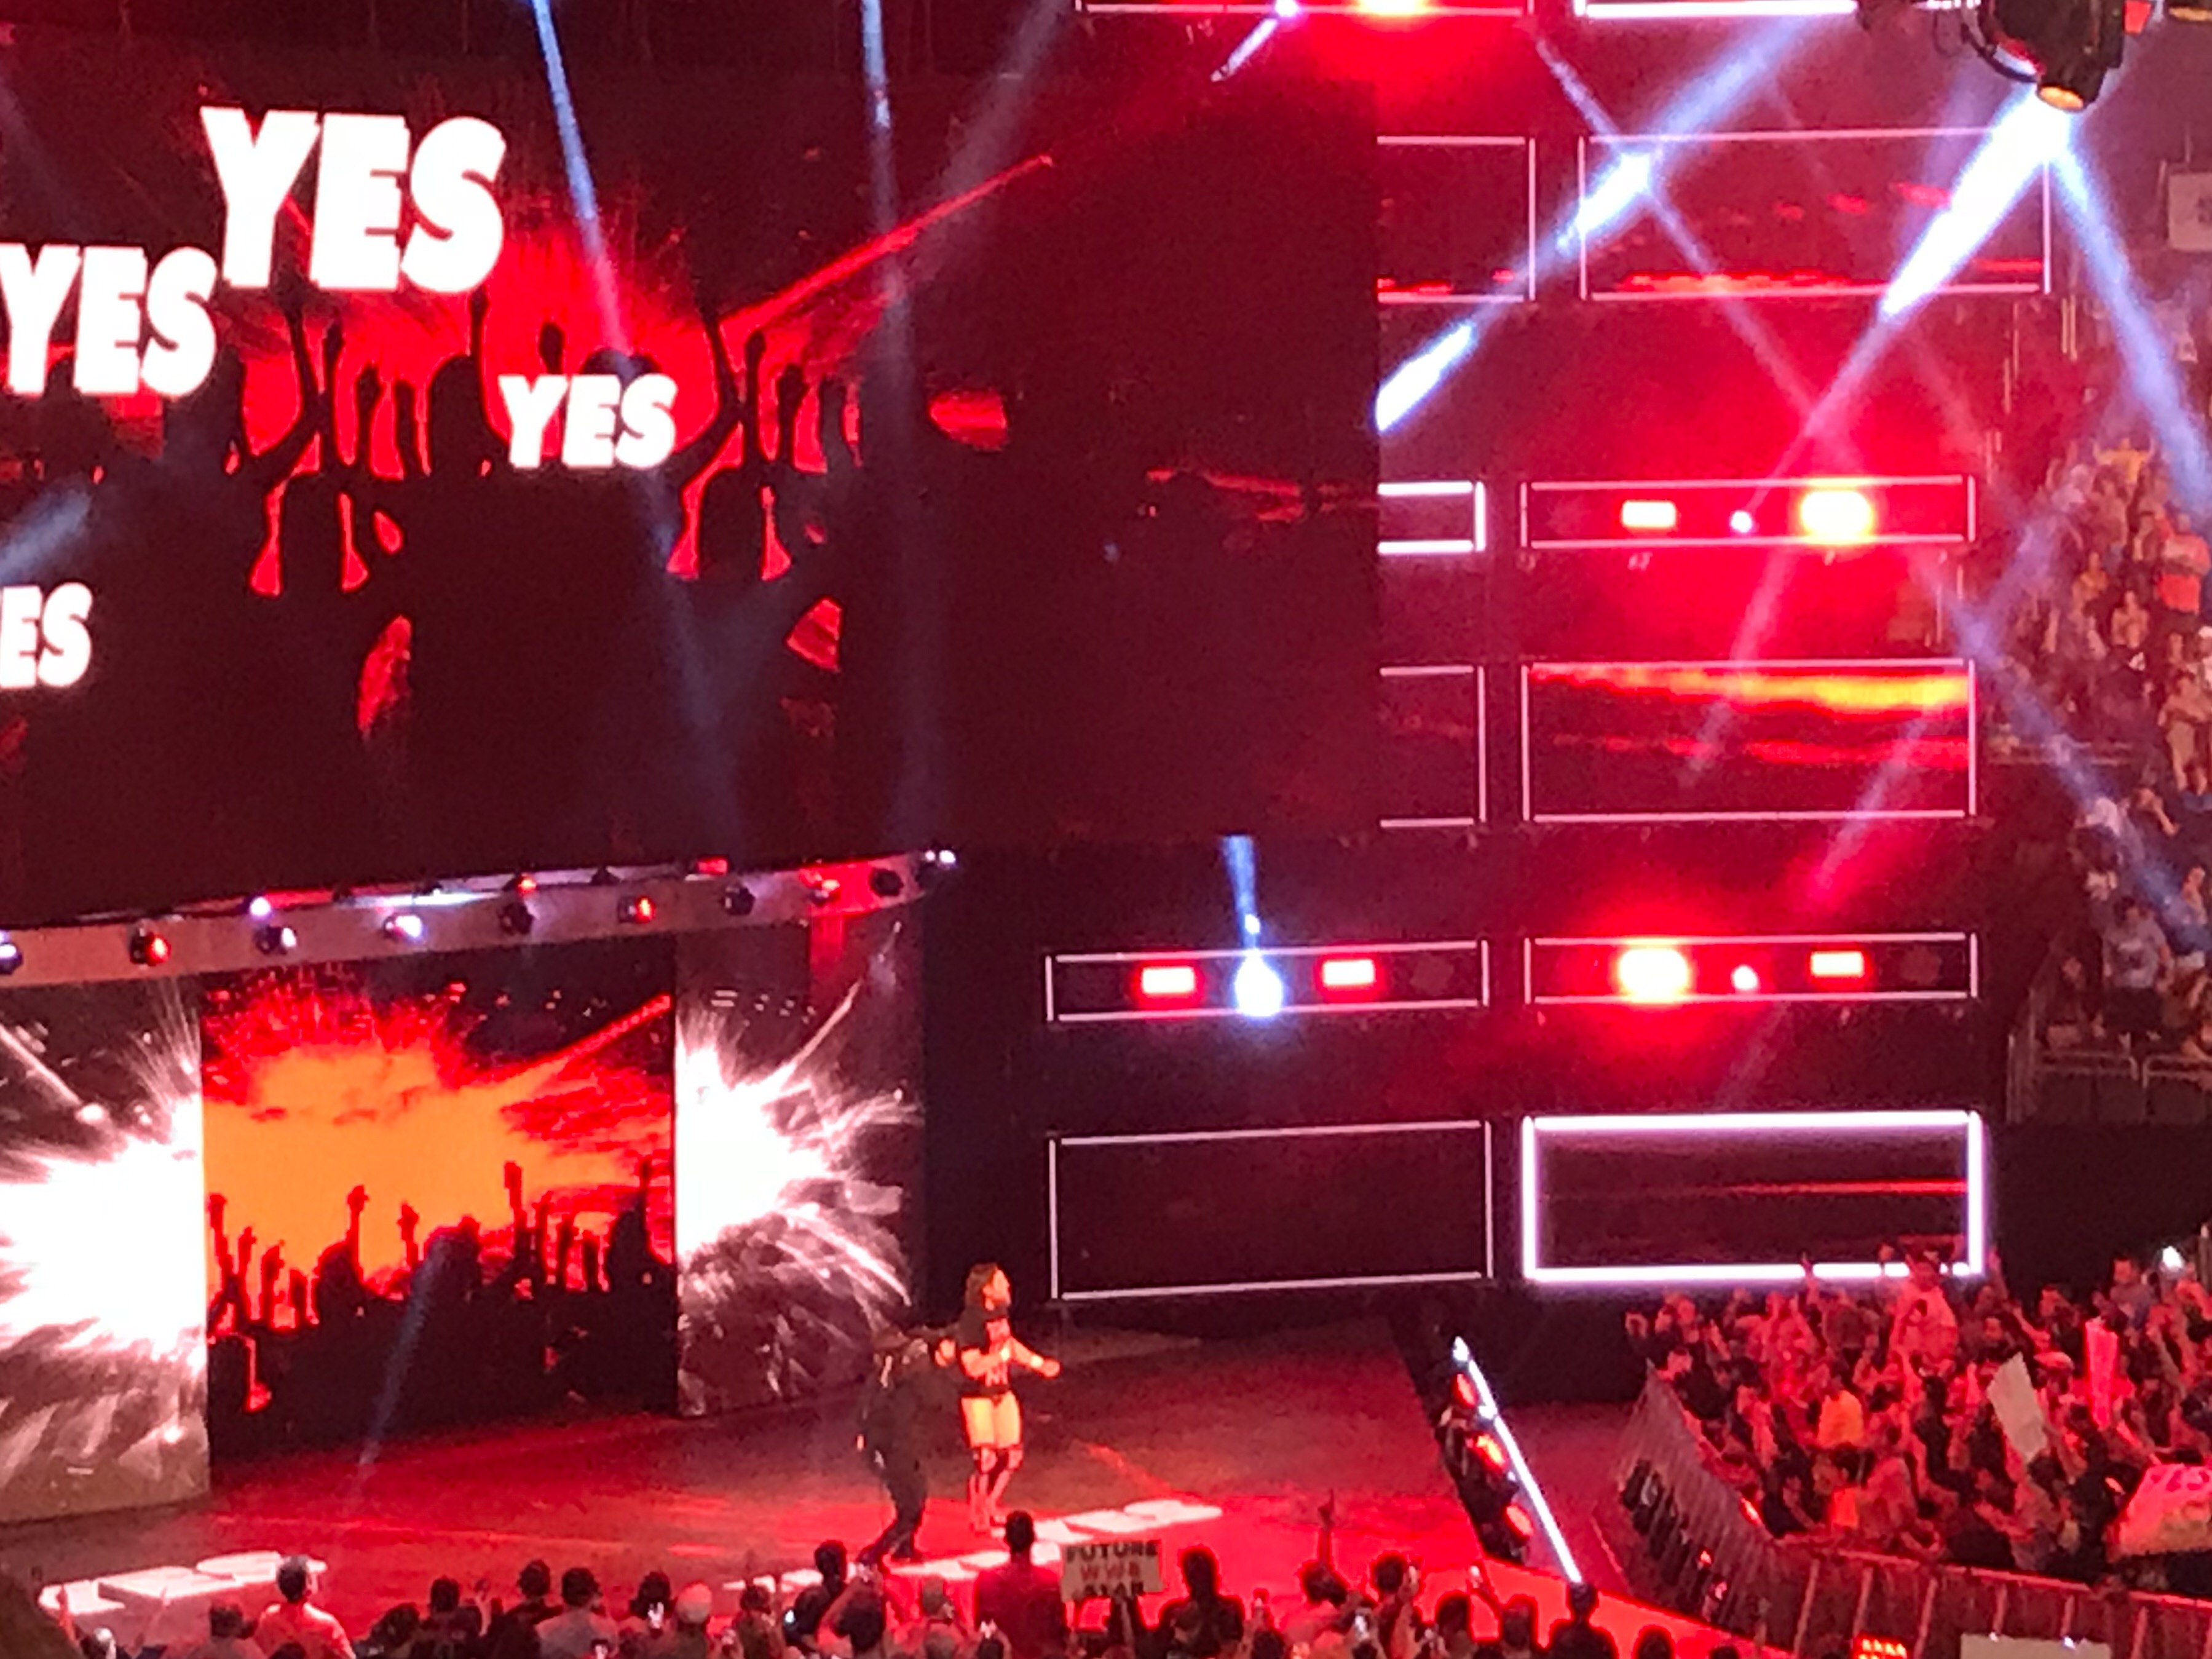 WWE Extreme Rules 2018